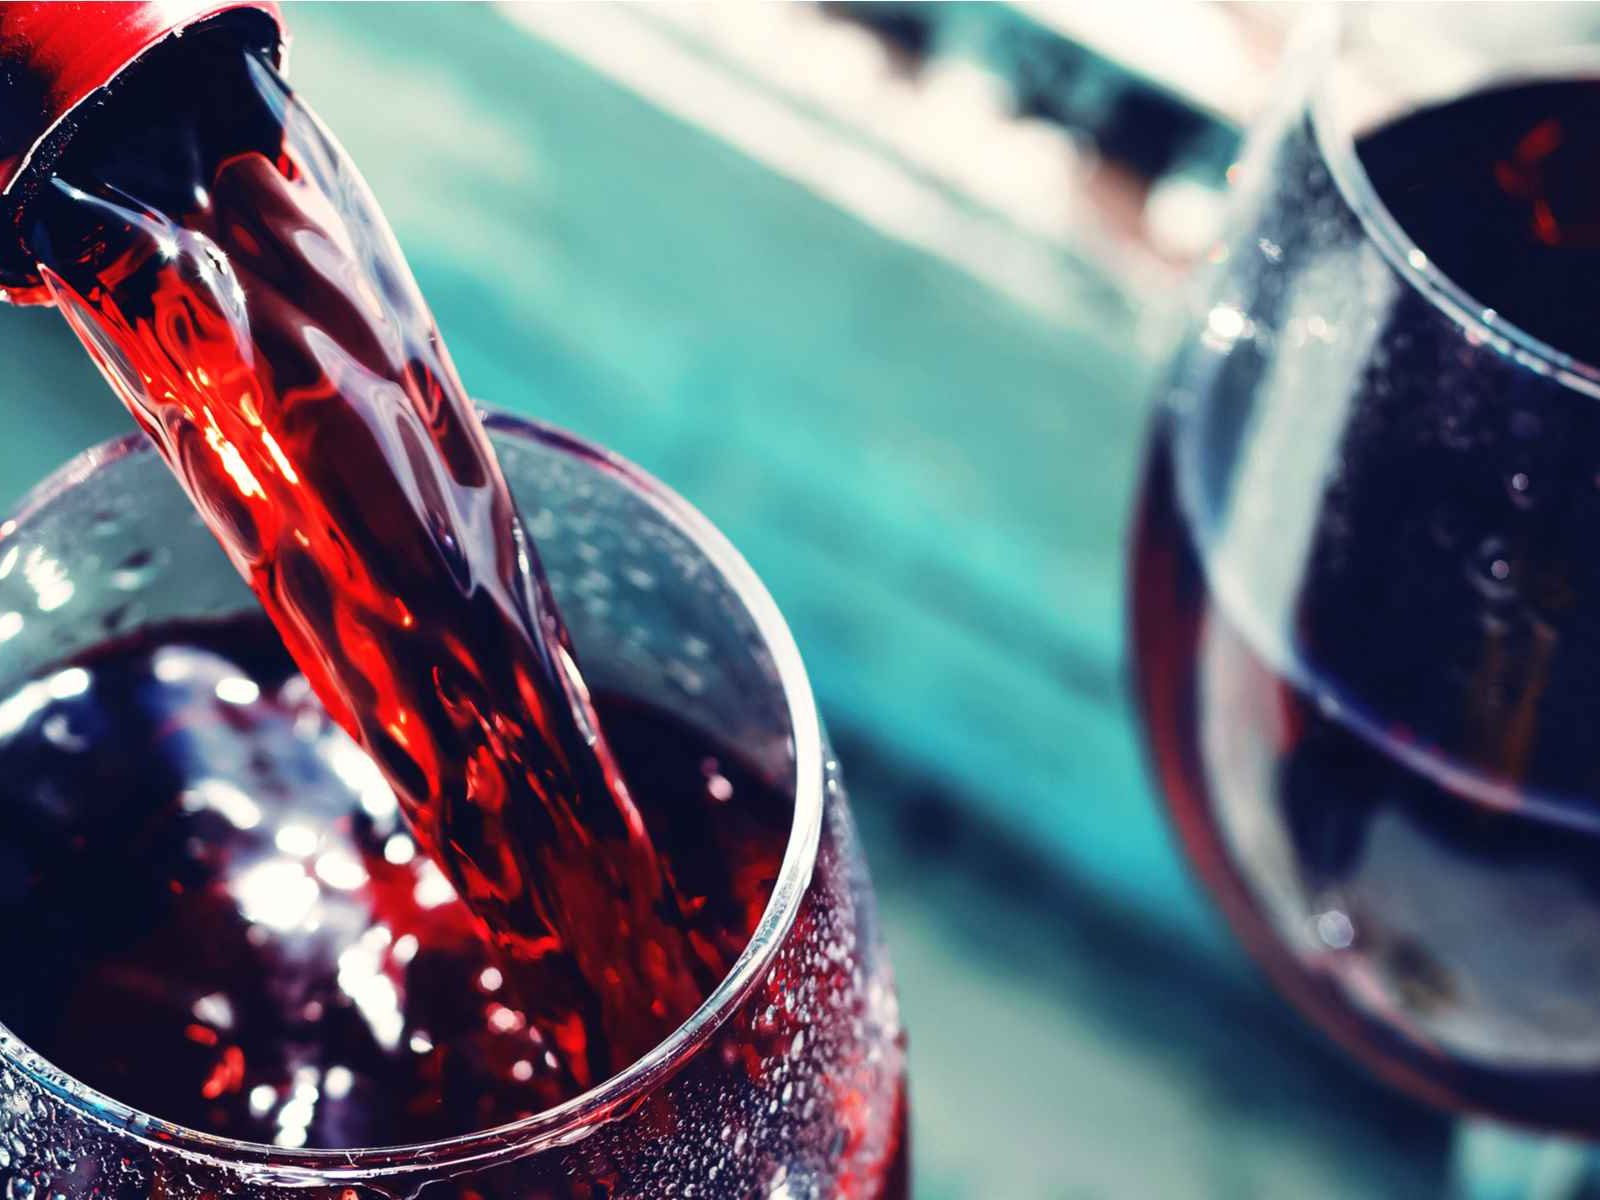 Top Five Red Wines to Chill in Summer